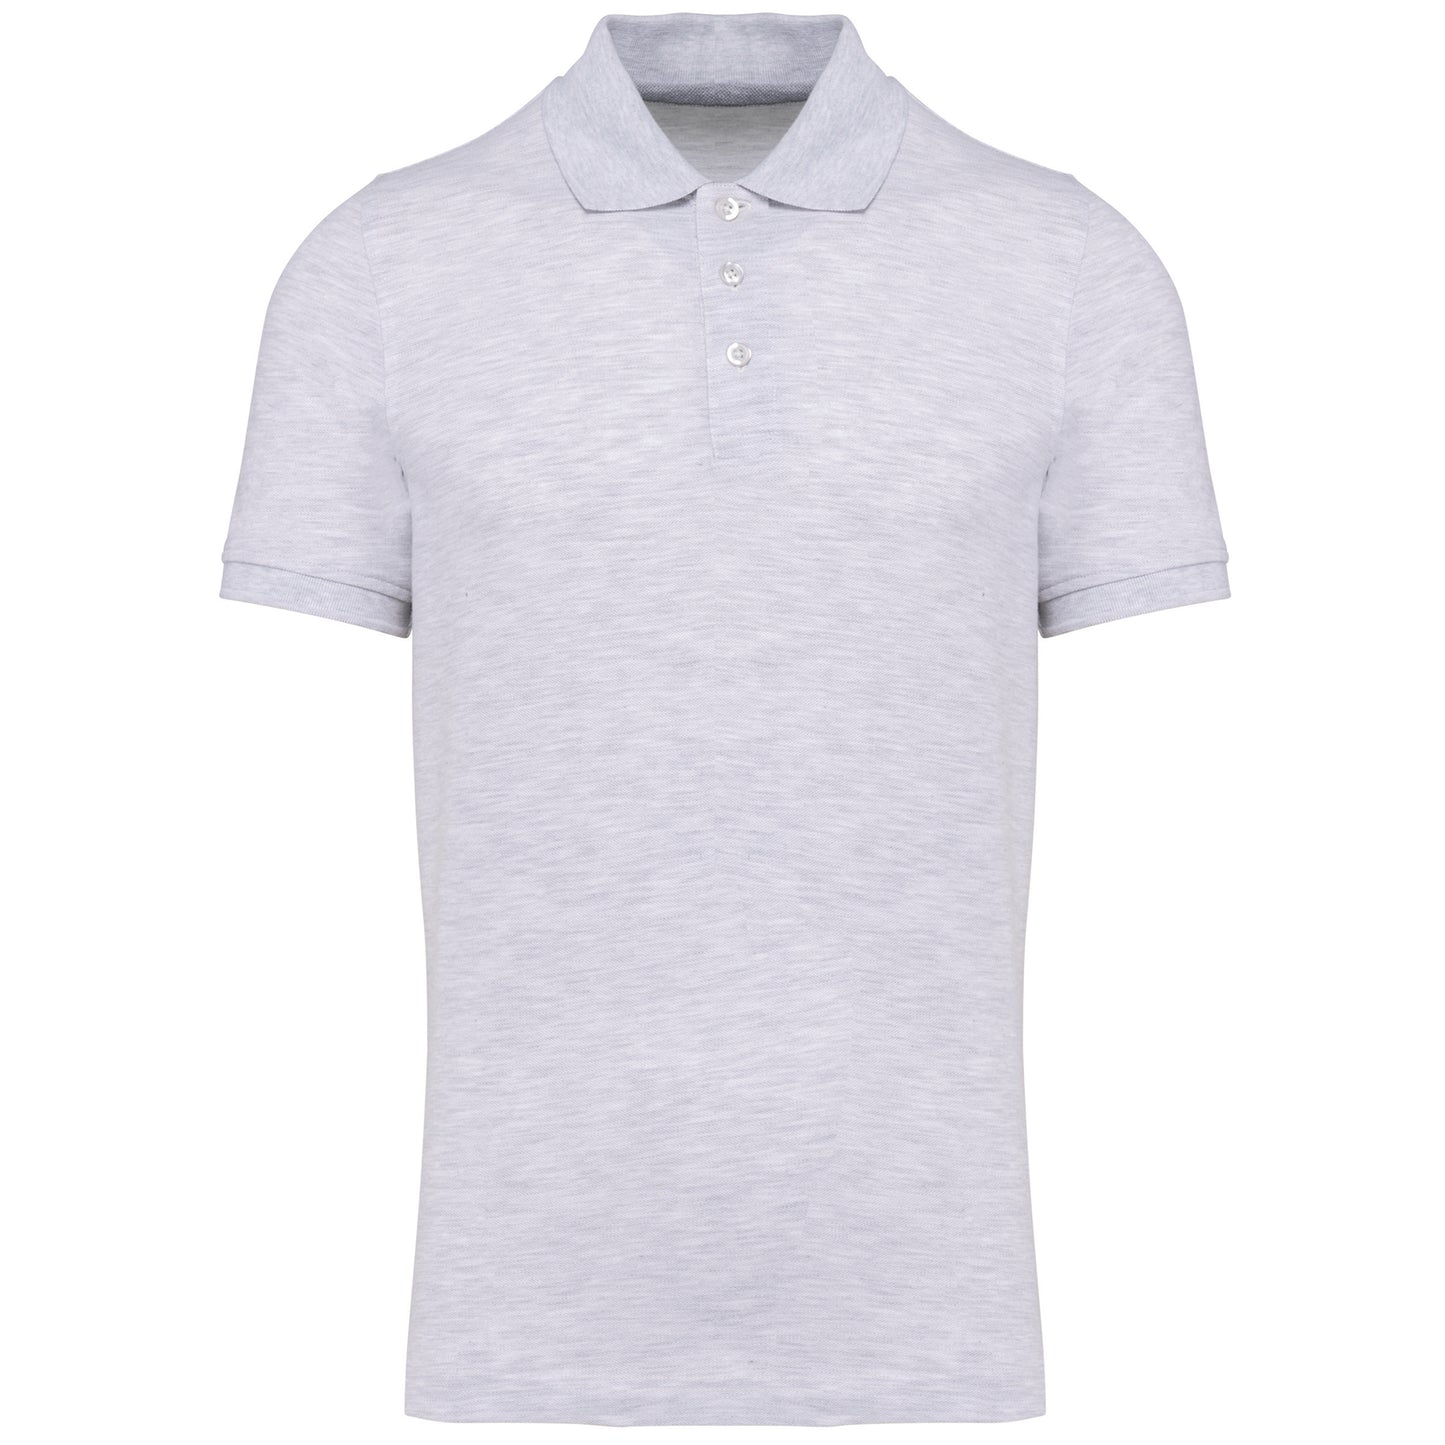 K241 - Polo manches courtes homme